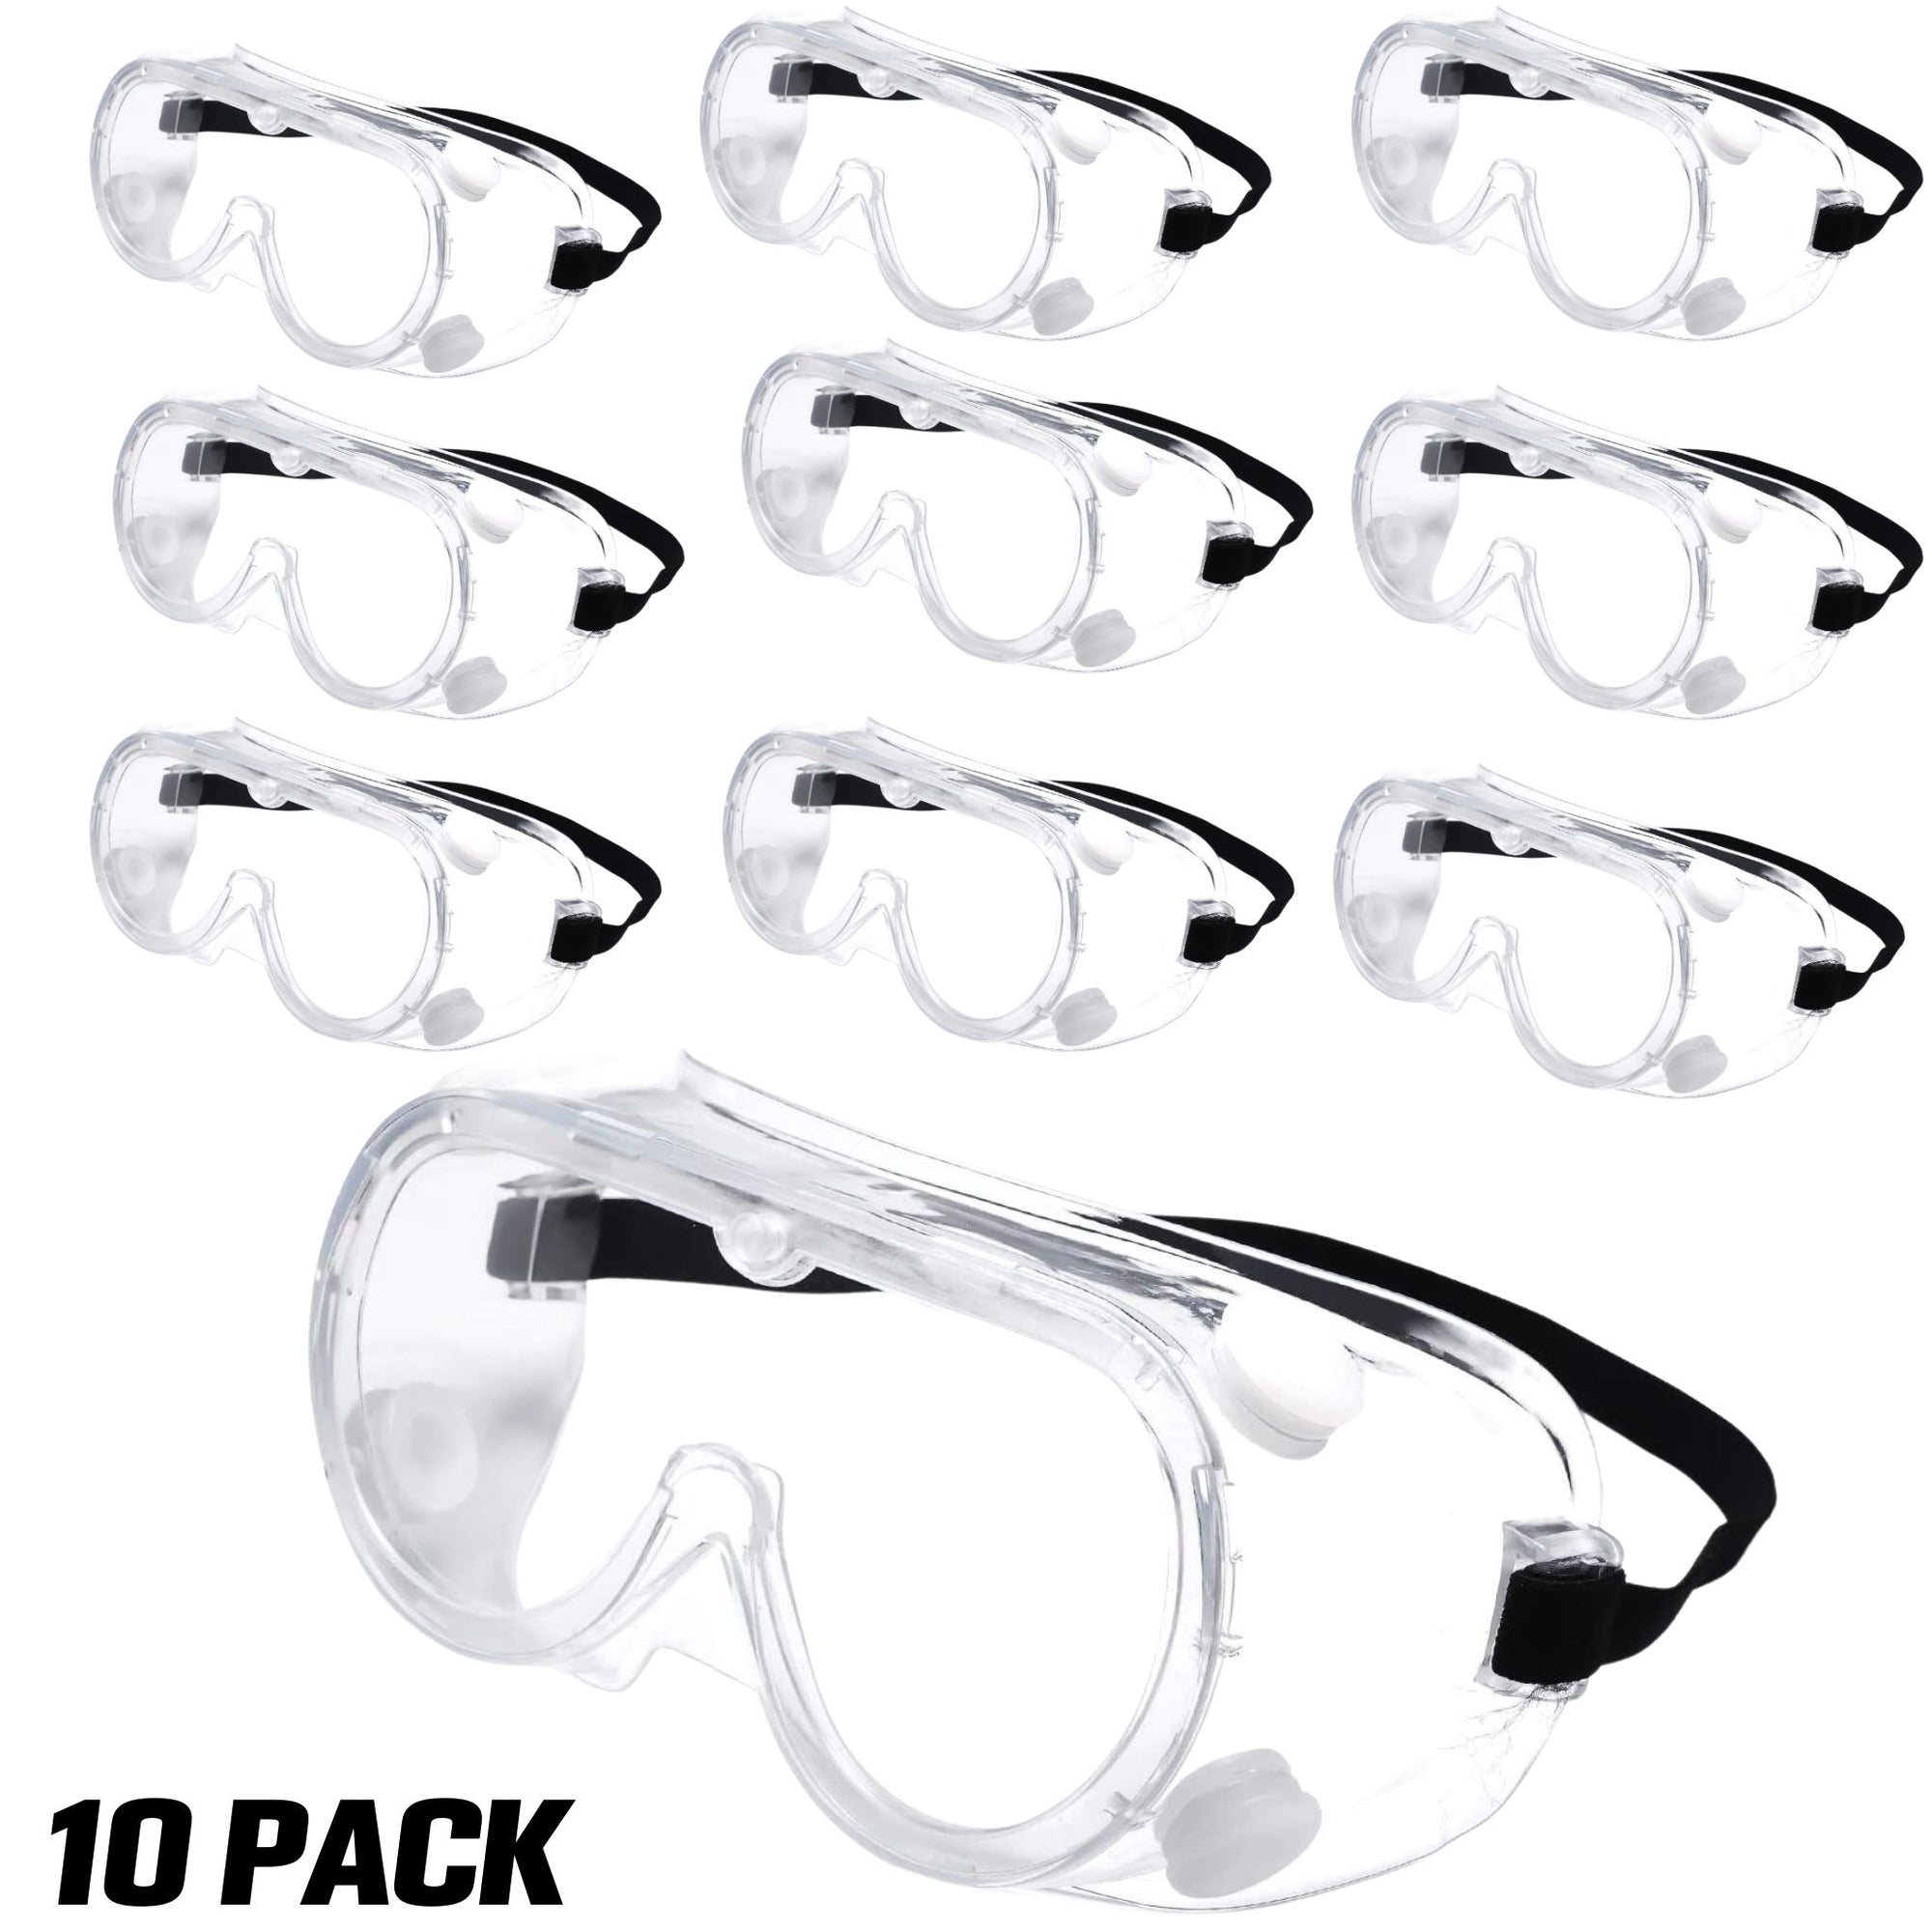 (10 PACK) MULTIGATE Vented Goggles Clear Anti Fog Safety Goggles - South East Clearance Centre